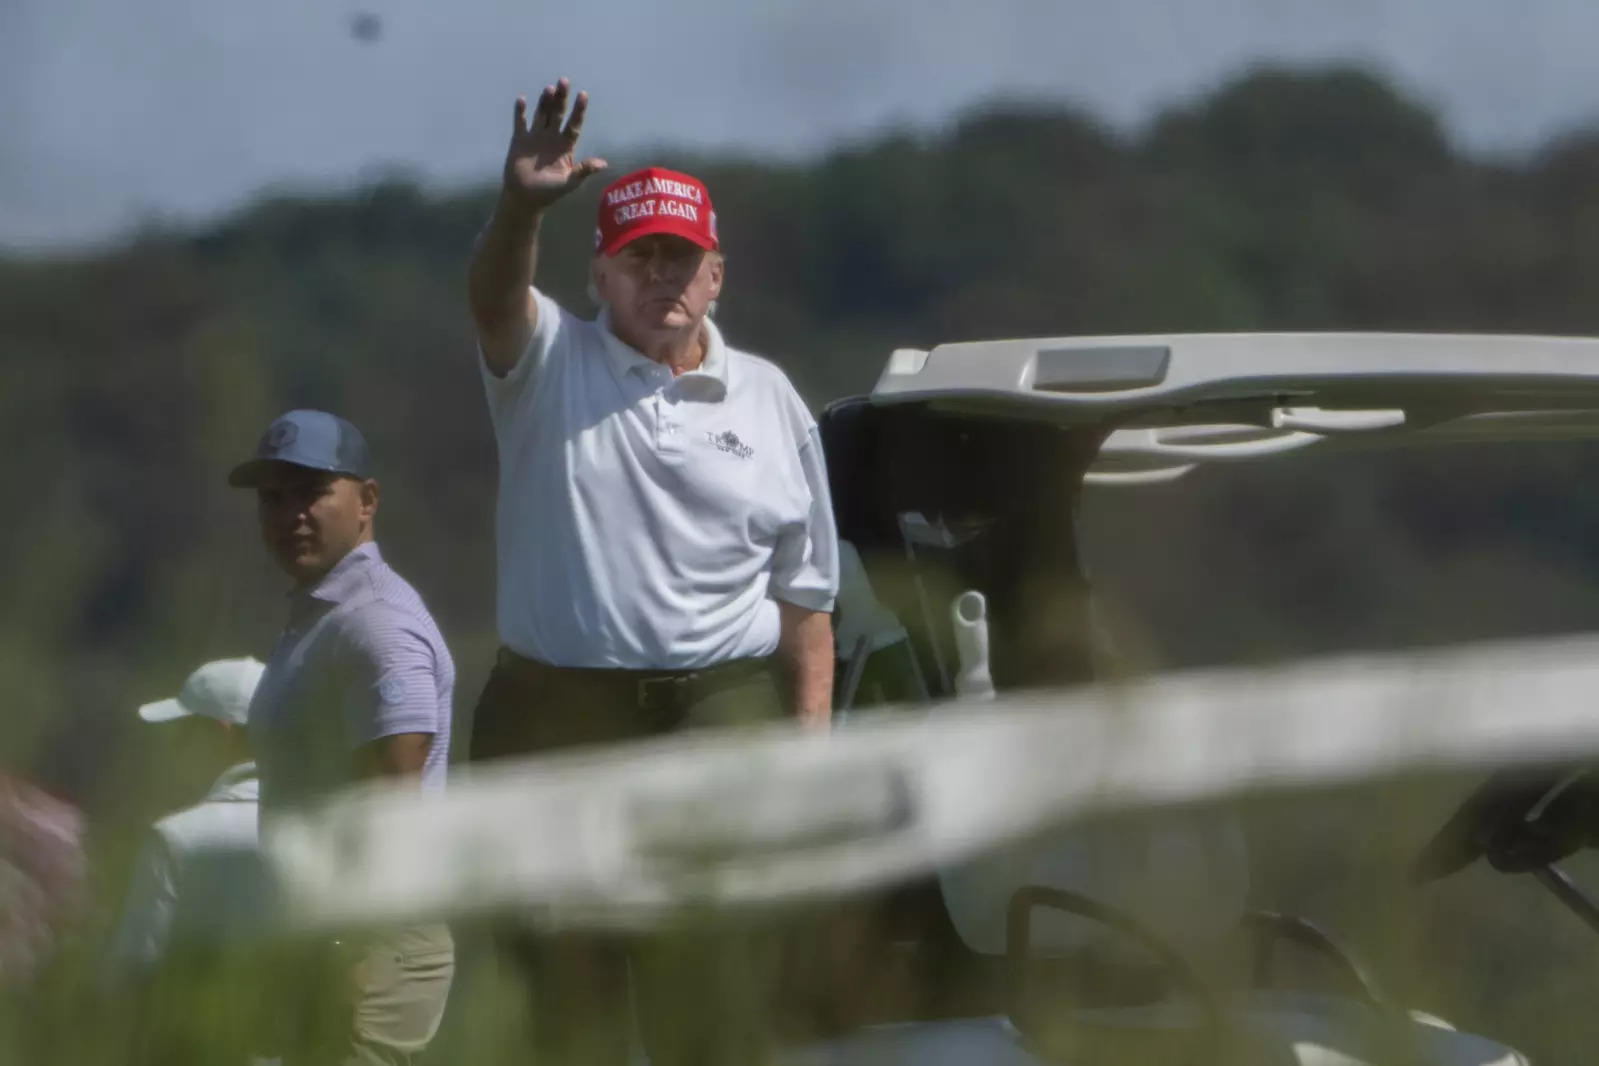 Former President Donald Trump gestures while playing golf at Trump National Golf Club in Sterling.